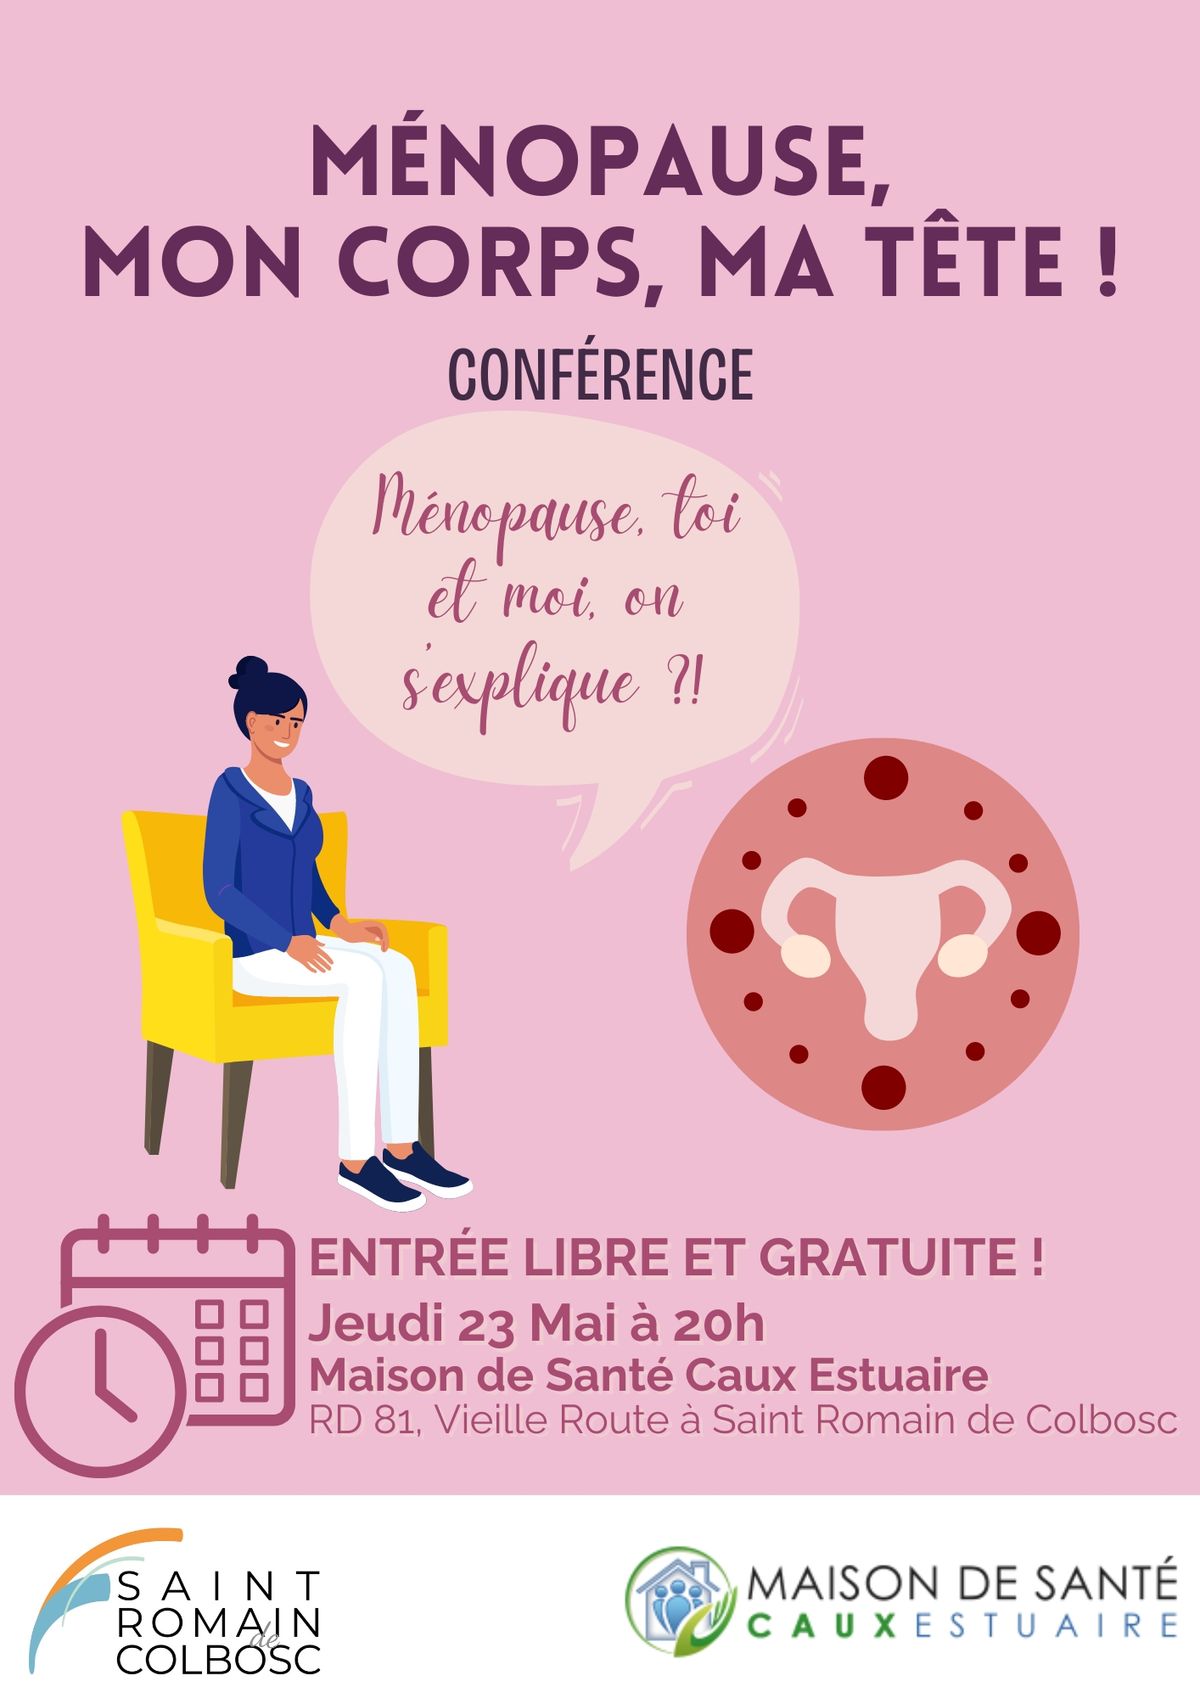 LES P'TITES CONF' DE LA MAISON DE SANT\u00c9 - M\u00c9NOPAUSE, MON CORPS, MA T\u00caTE !